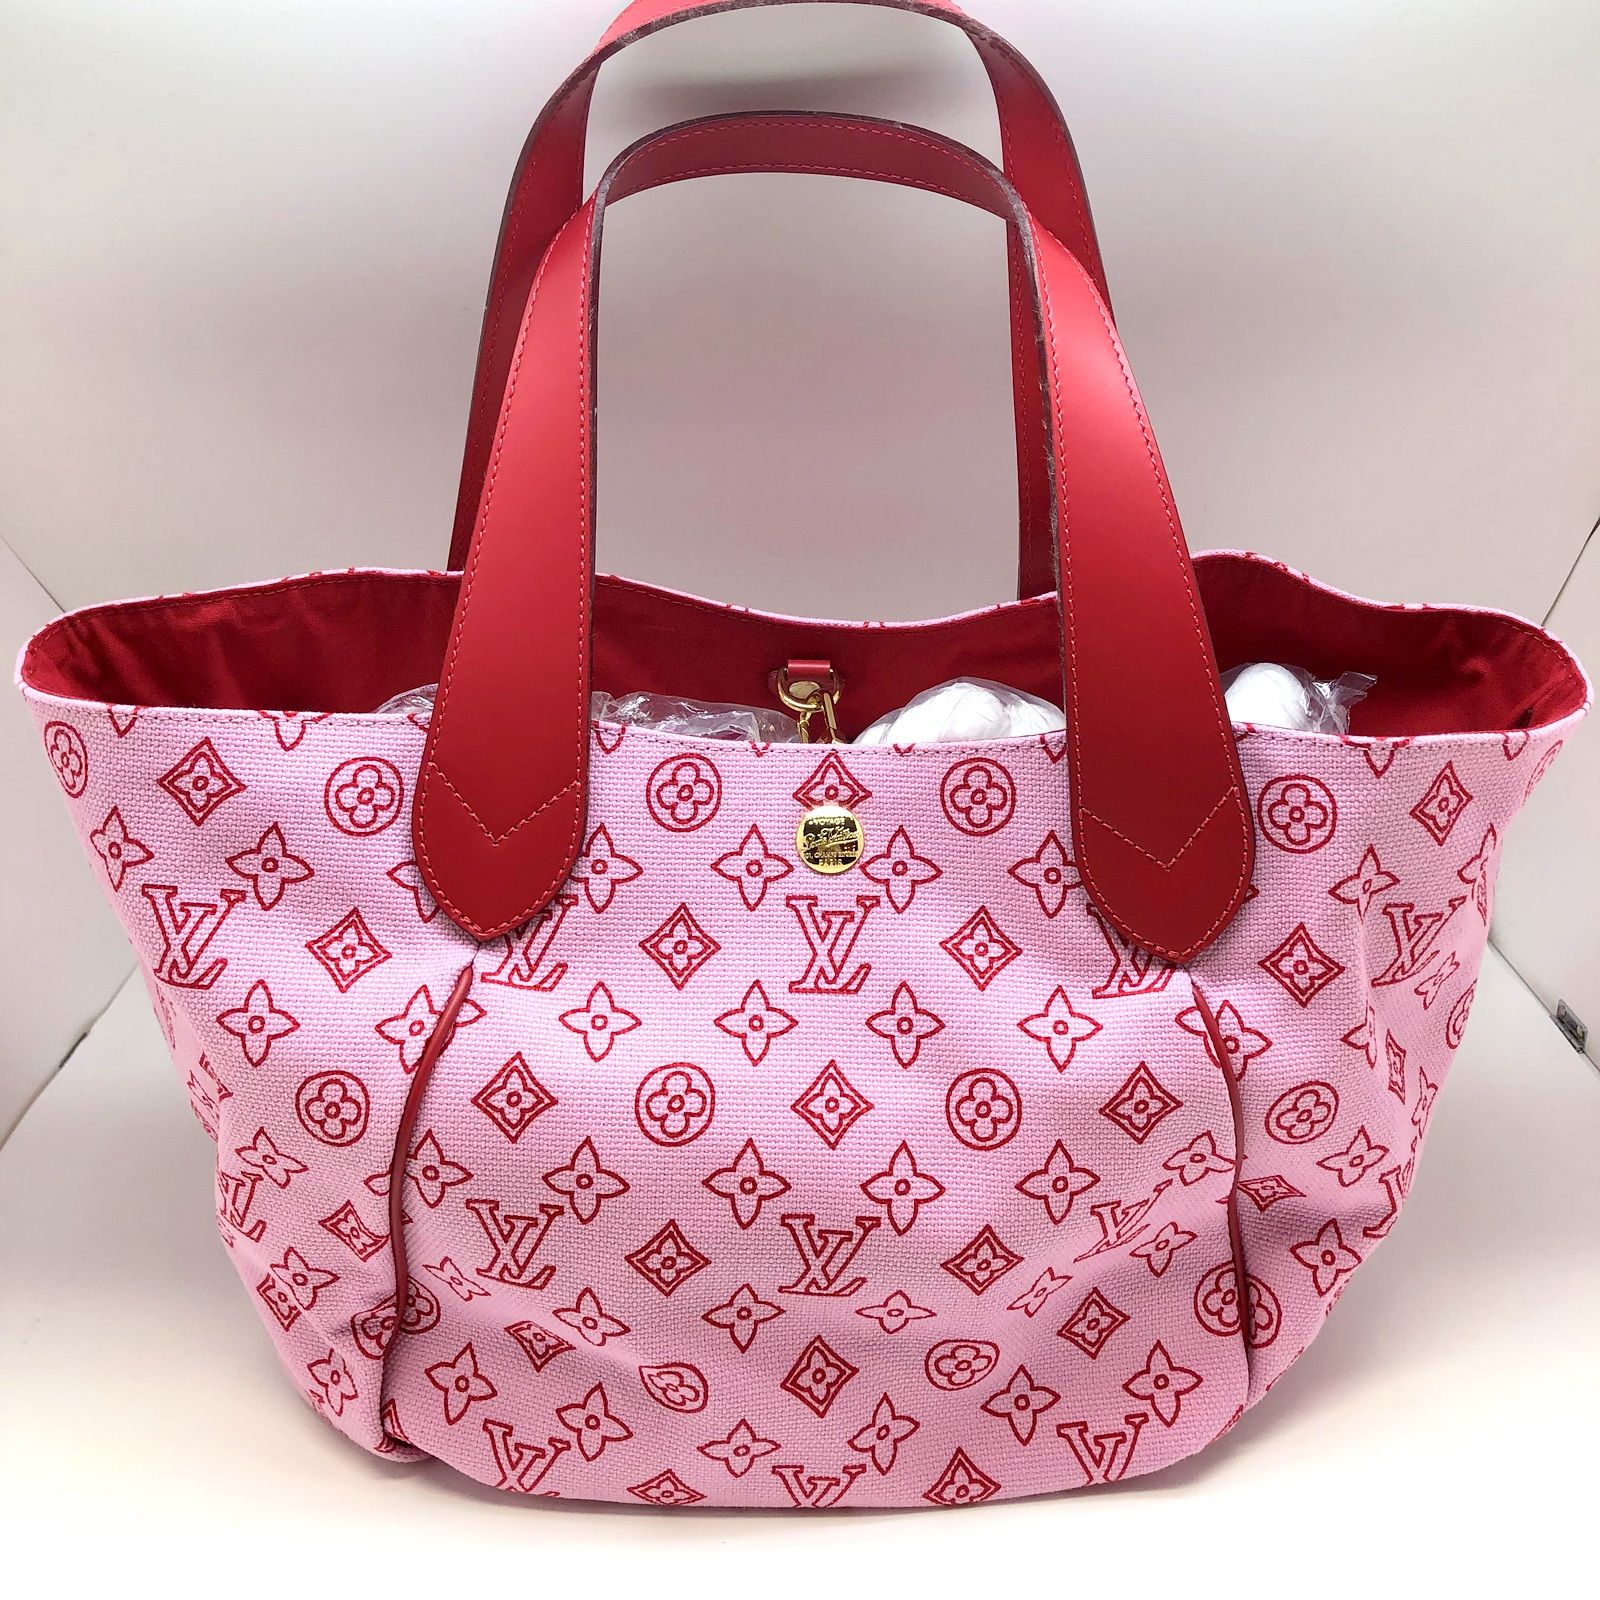 LOUIS VUITTON トートバッグ カバイパネマPM M95984